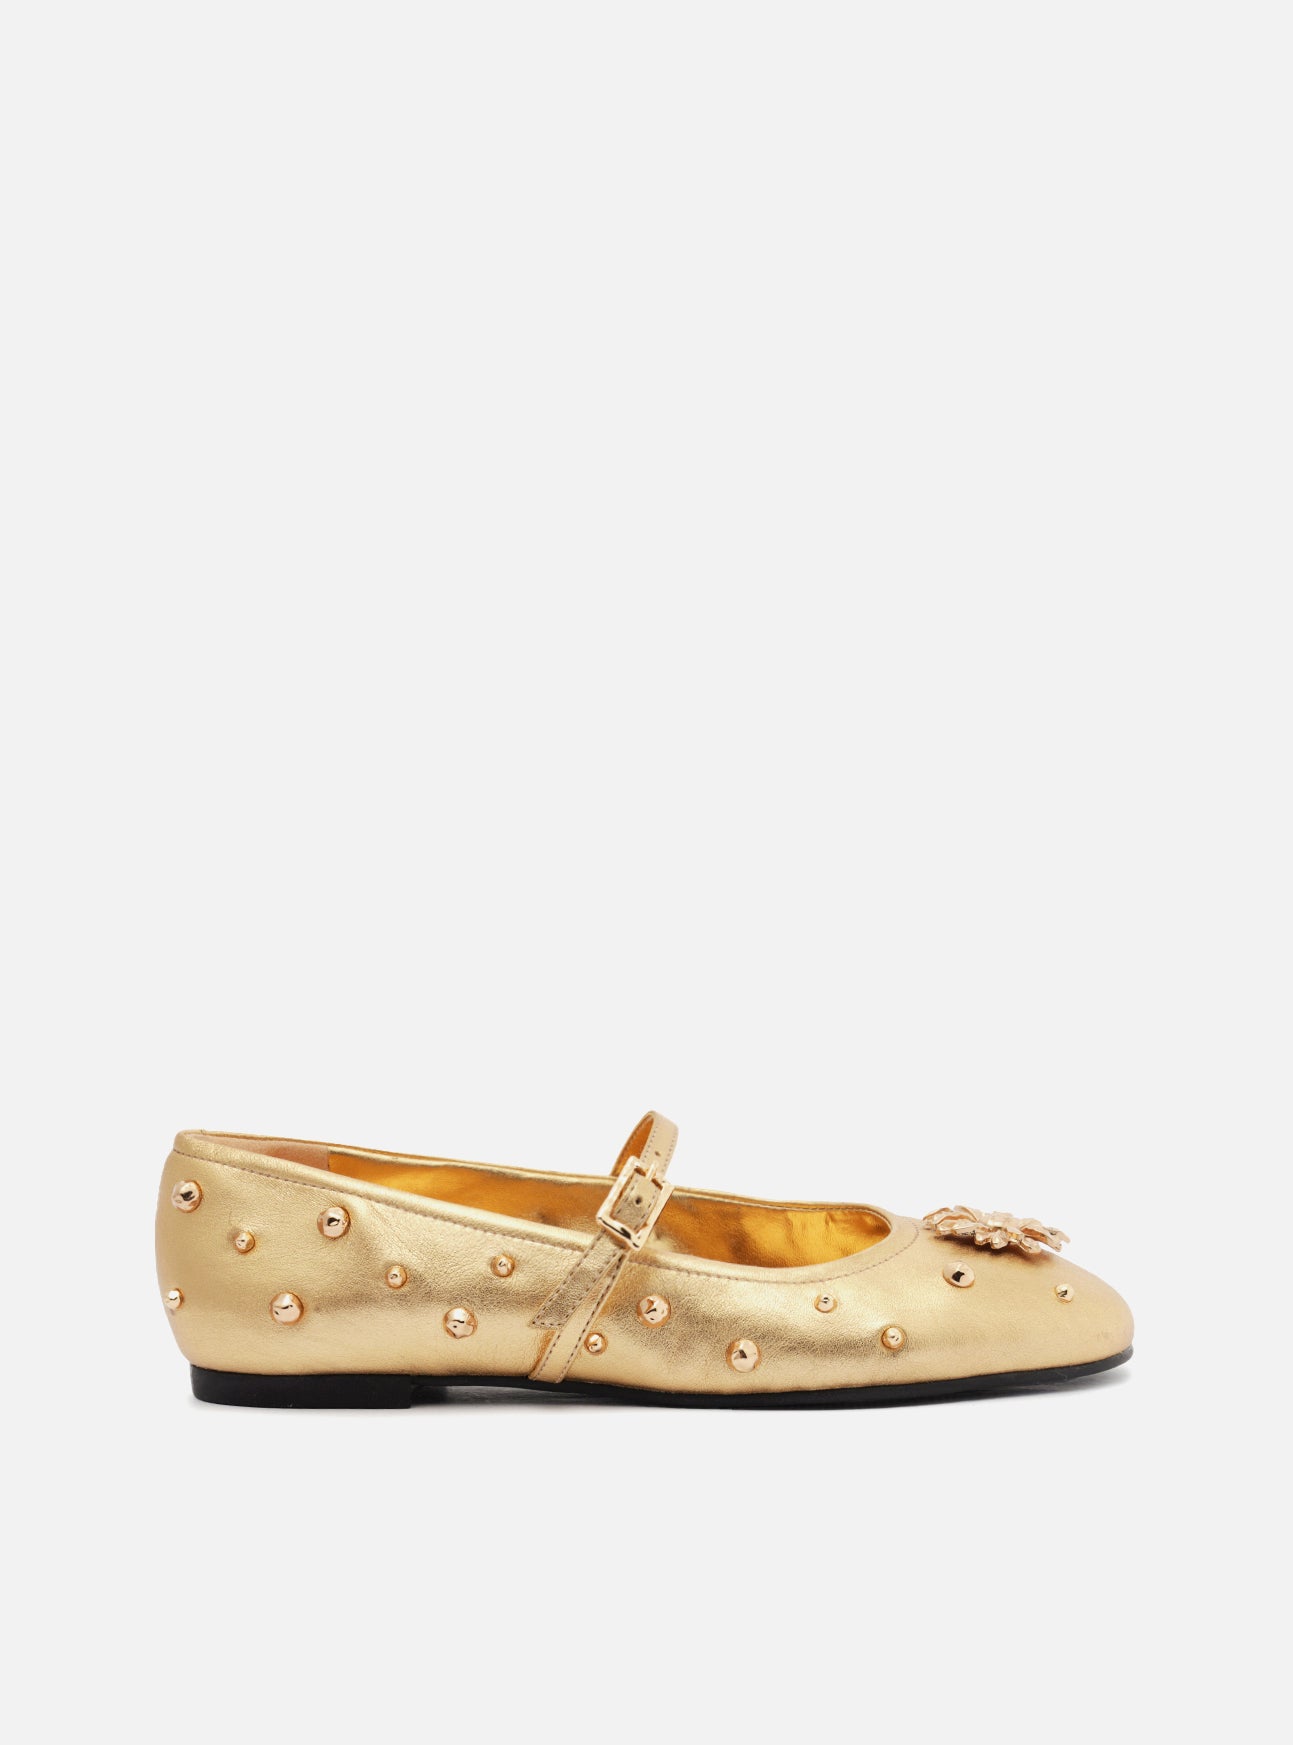 Golden ballet with metallic details throughout the shoe, flat and rounded toe. It is closed, with a round cutout on the vamp and a thin strap on the top with a side metal buckle.